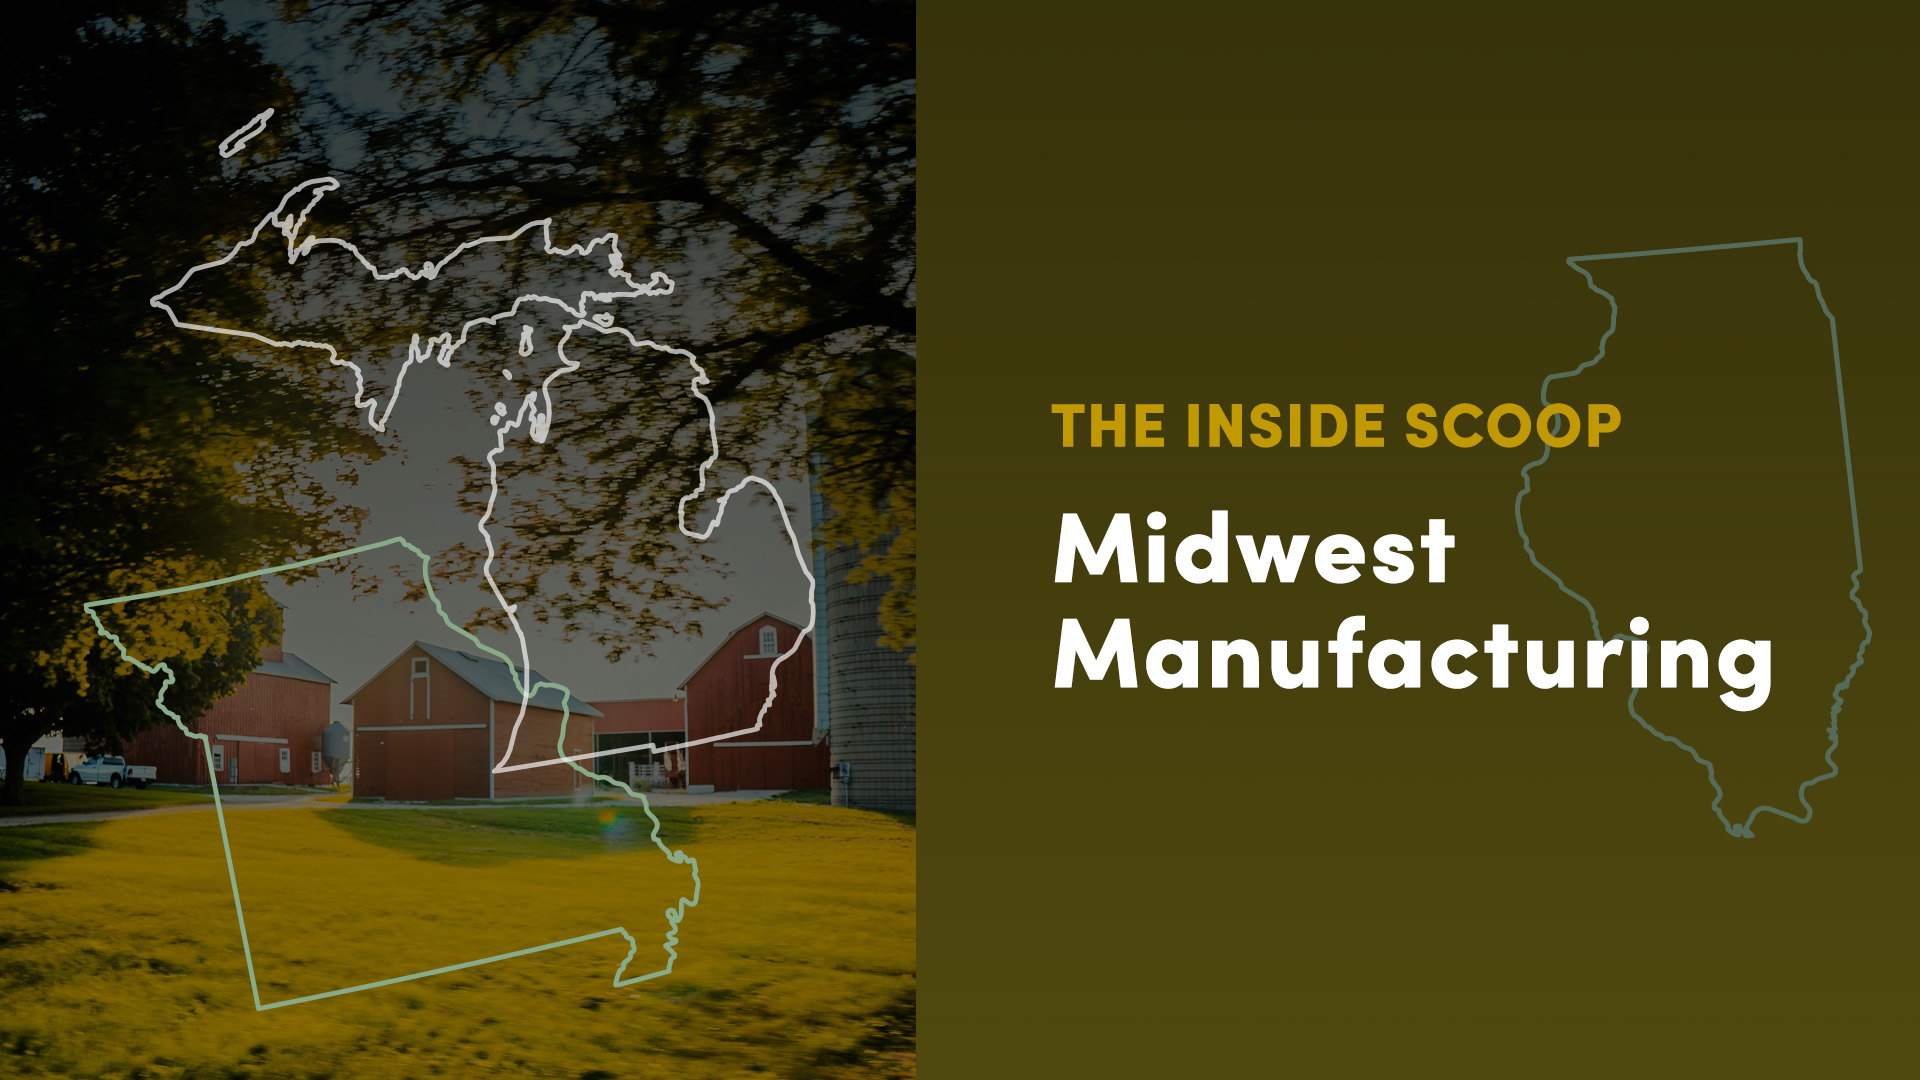 The Inside Scoop: Midwest Manufacturing